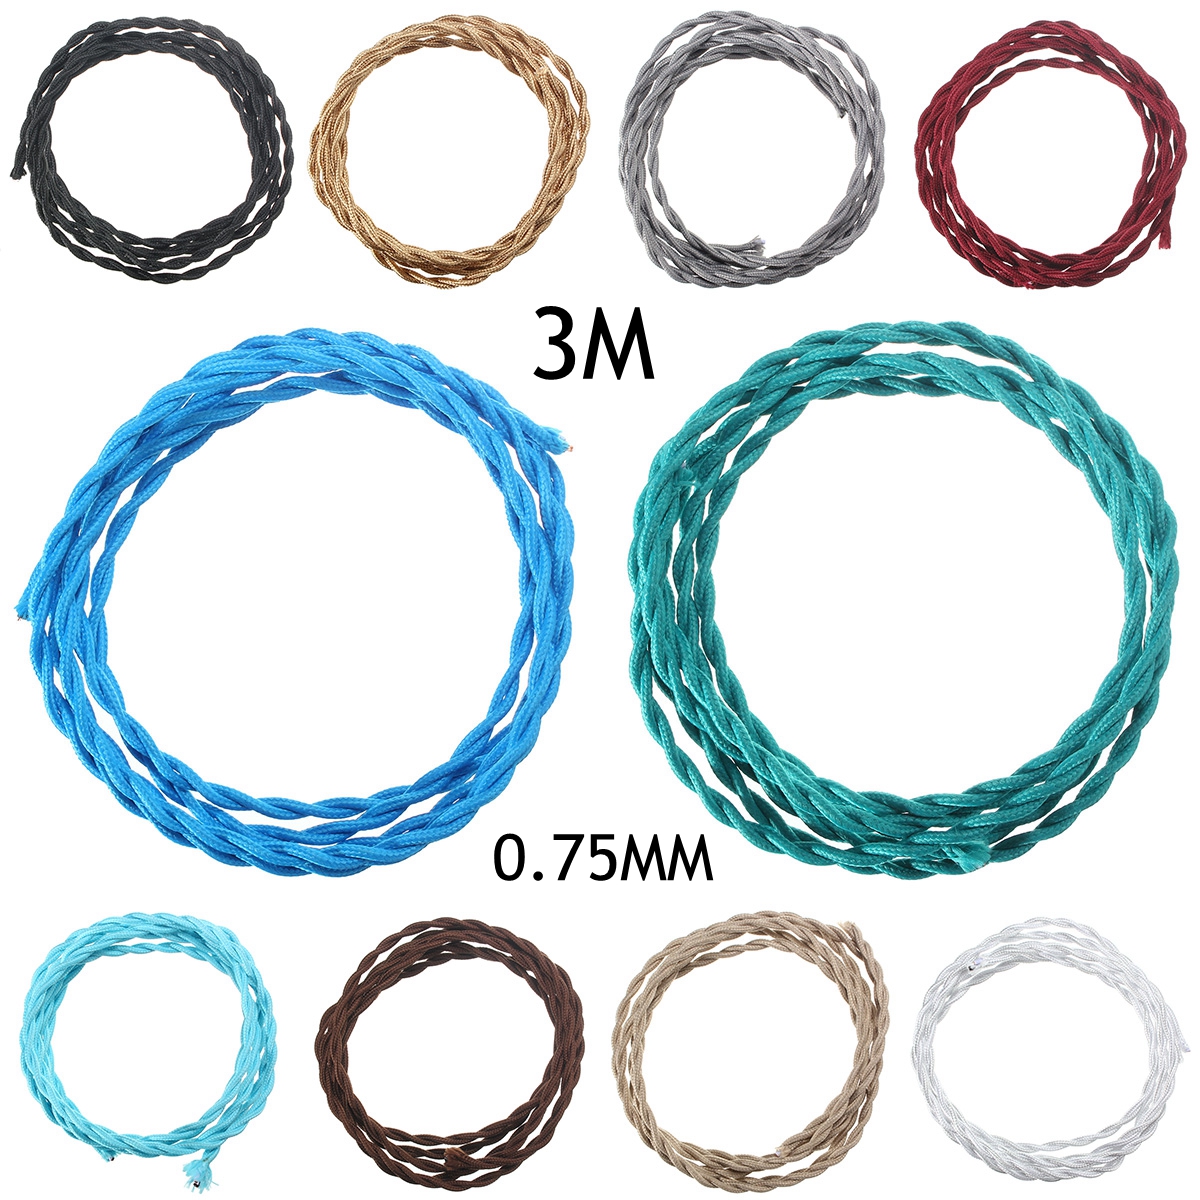 3M-Vintage-2-Core-Twist-Braided-Fabric-Cable-Wire-Electric-Lighting-Cord-1068748-1